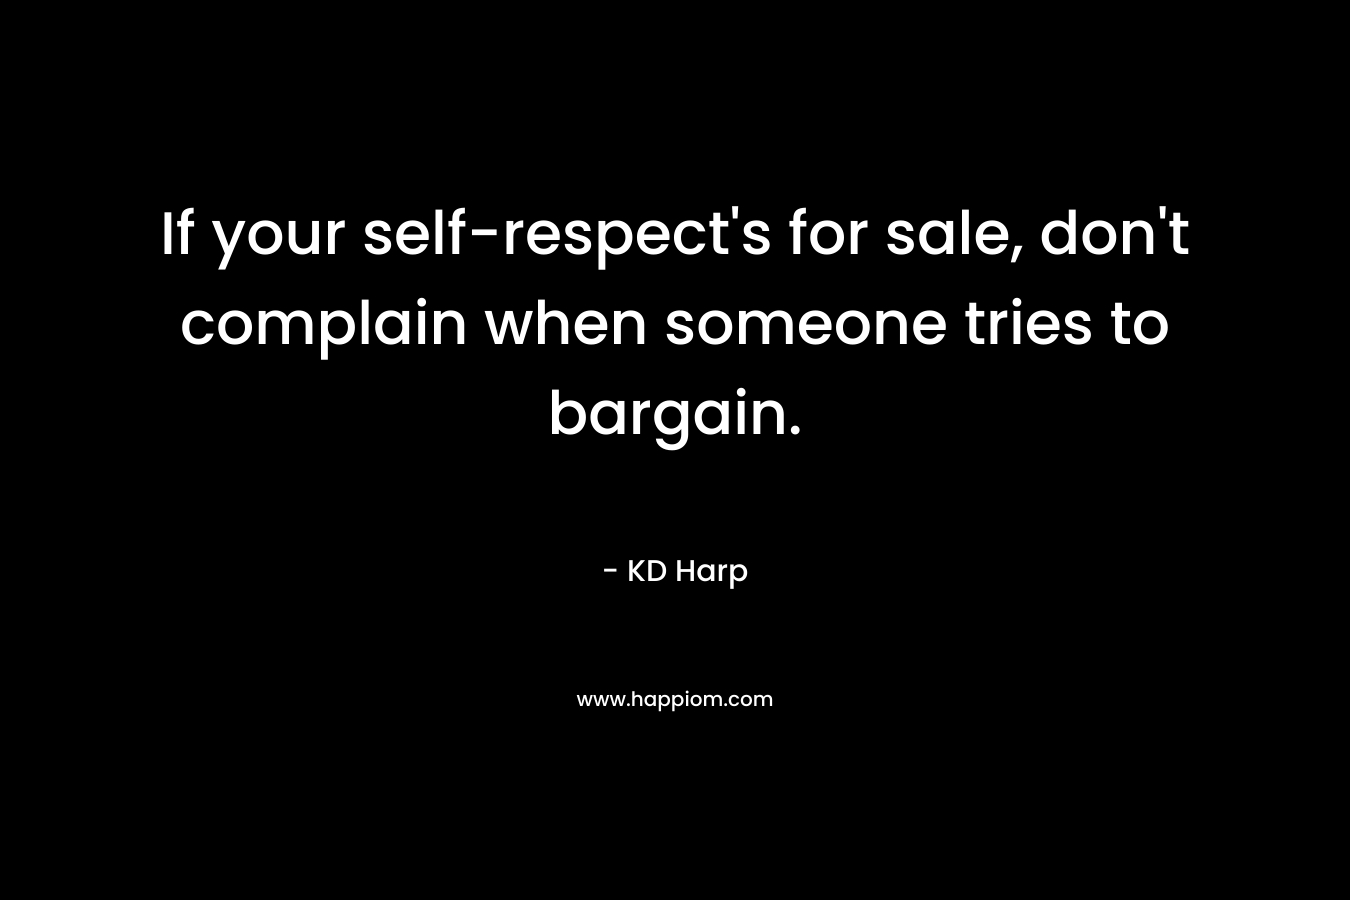 If your self-respect’s for sale, don’t complain when someone tries to bargain. – KD Harp